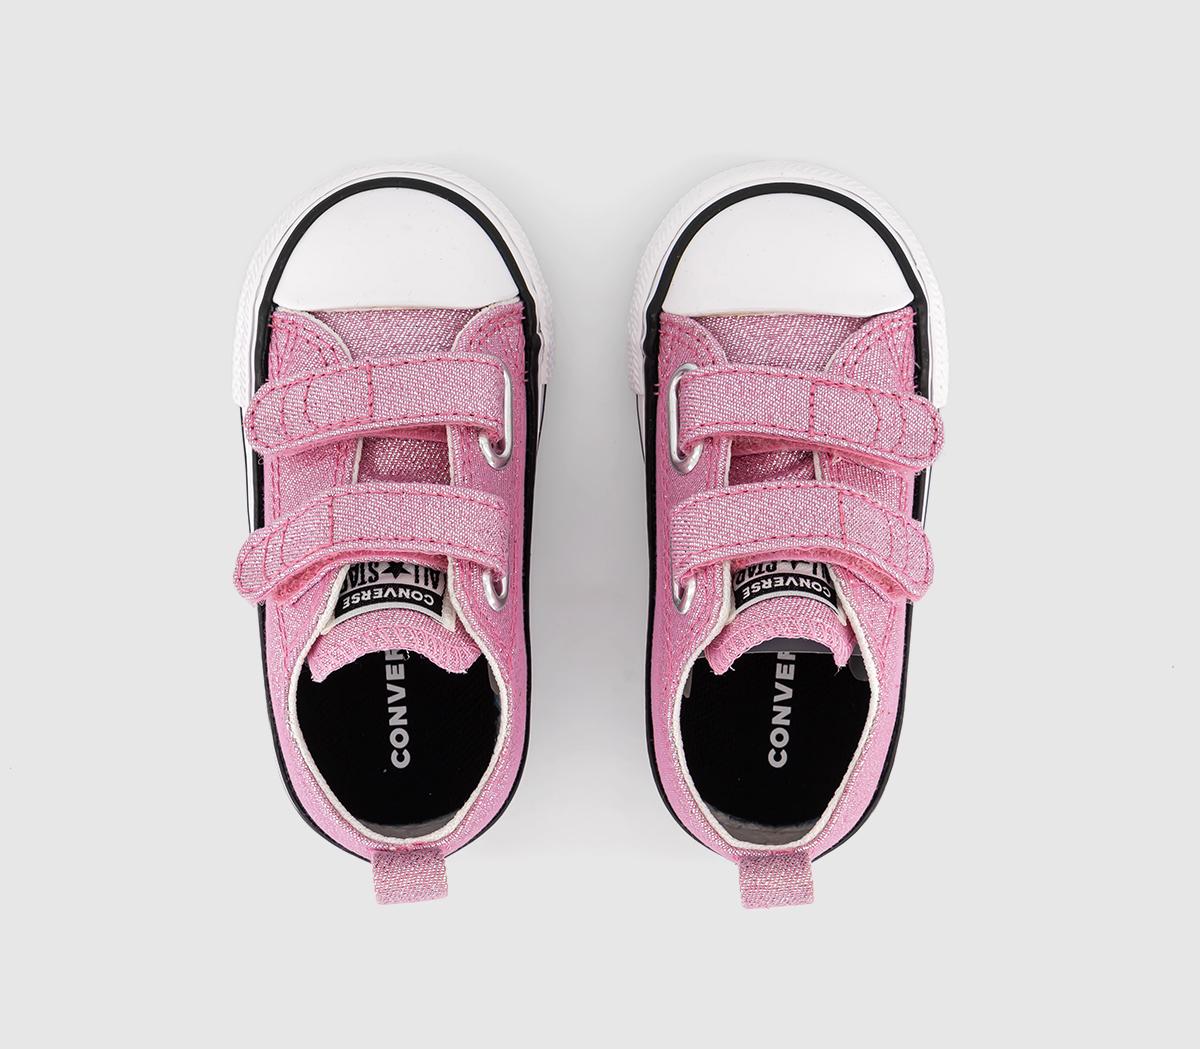 Converse All Star 2vlace Infant Trainers Pink Black White - Unisex